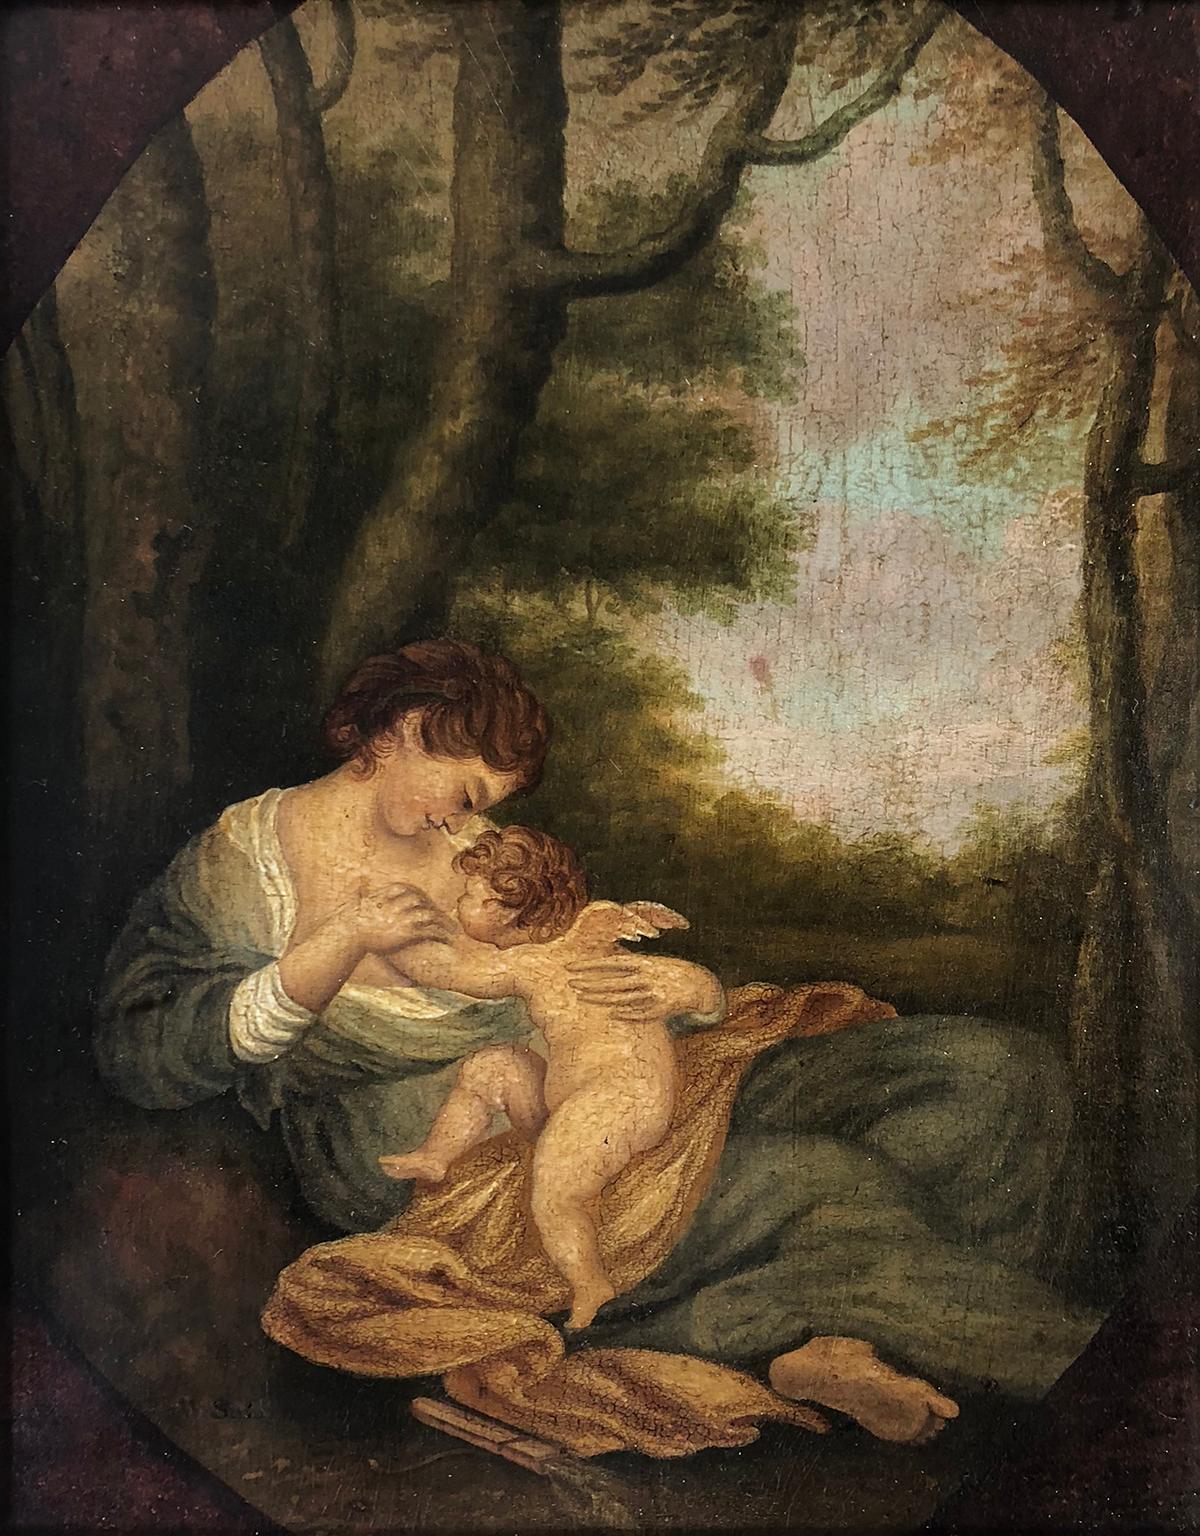 Unknown Figurative Painting - Venus and Cupid Circa Early 19th Century - Oil on panel 